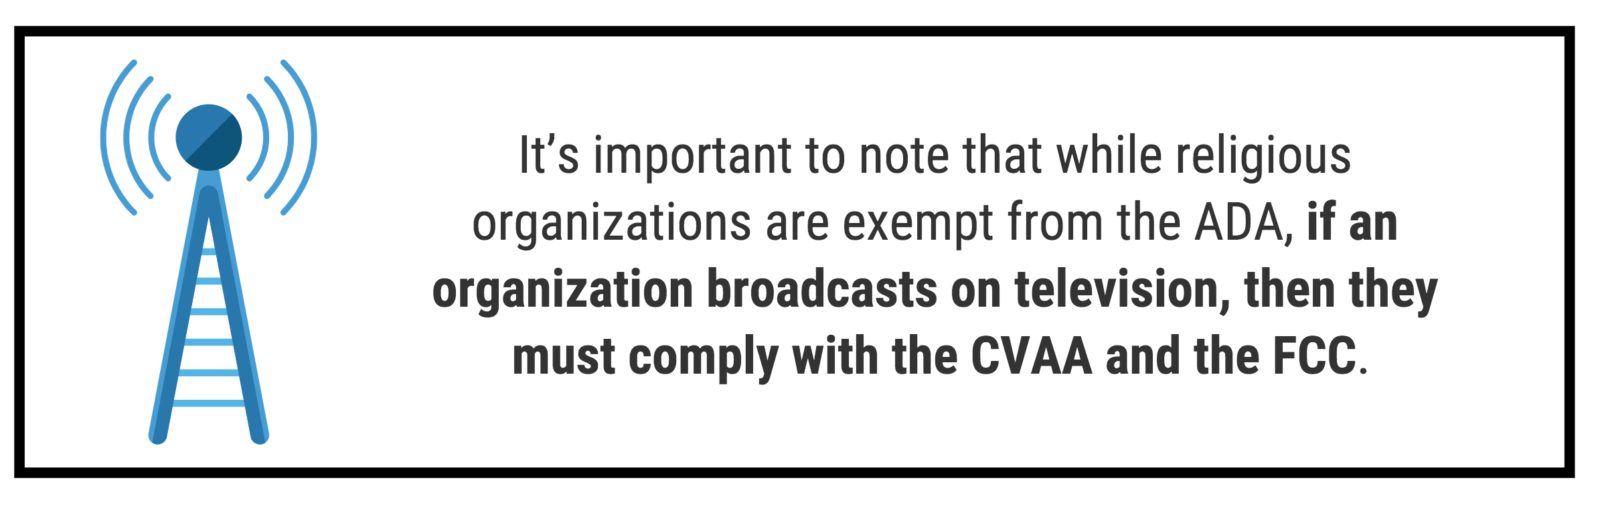 It’s important to note that while religious organizations are exempt from the ADA, if an organization broadcasts on television, then they must comply with the CVAA and the FCC.